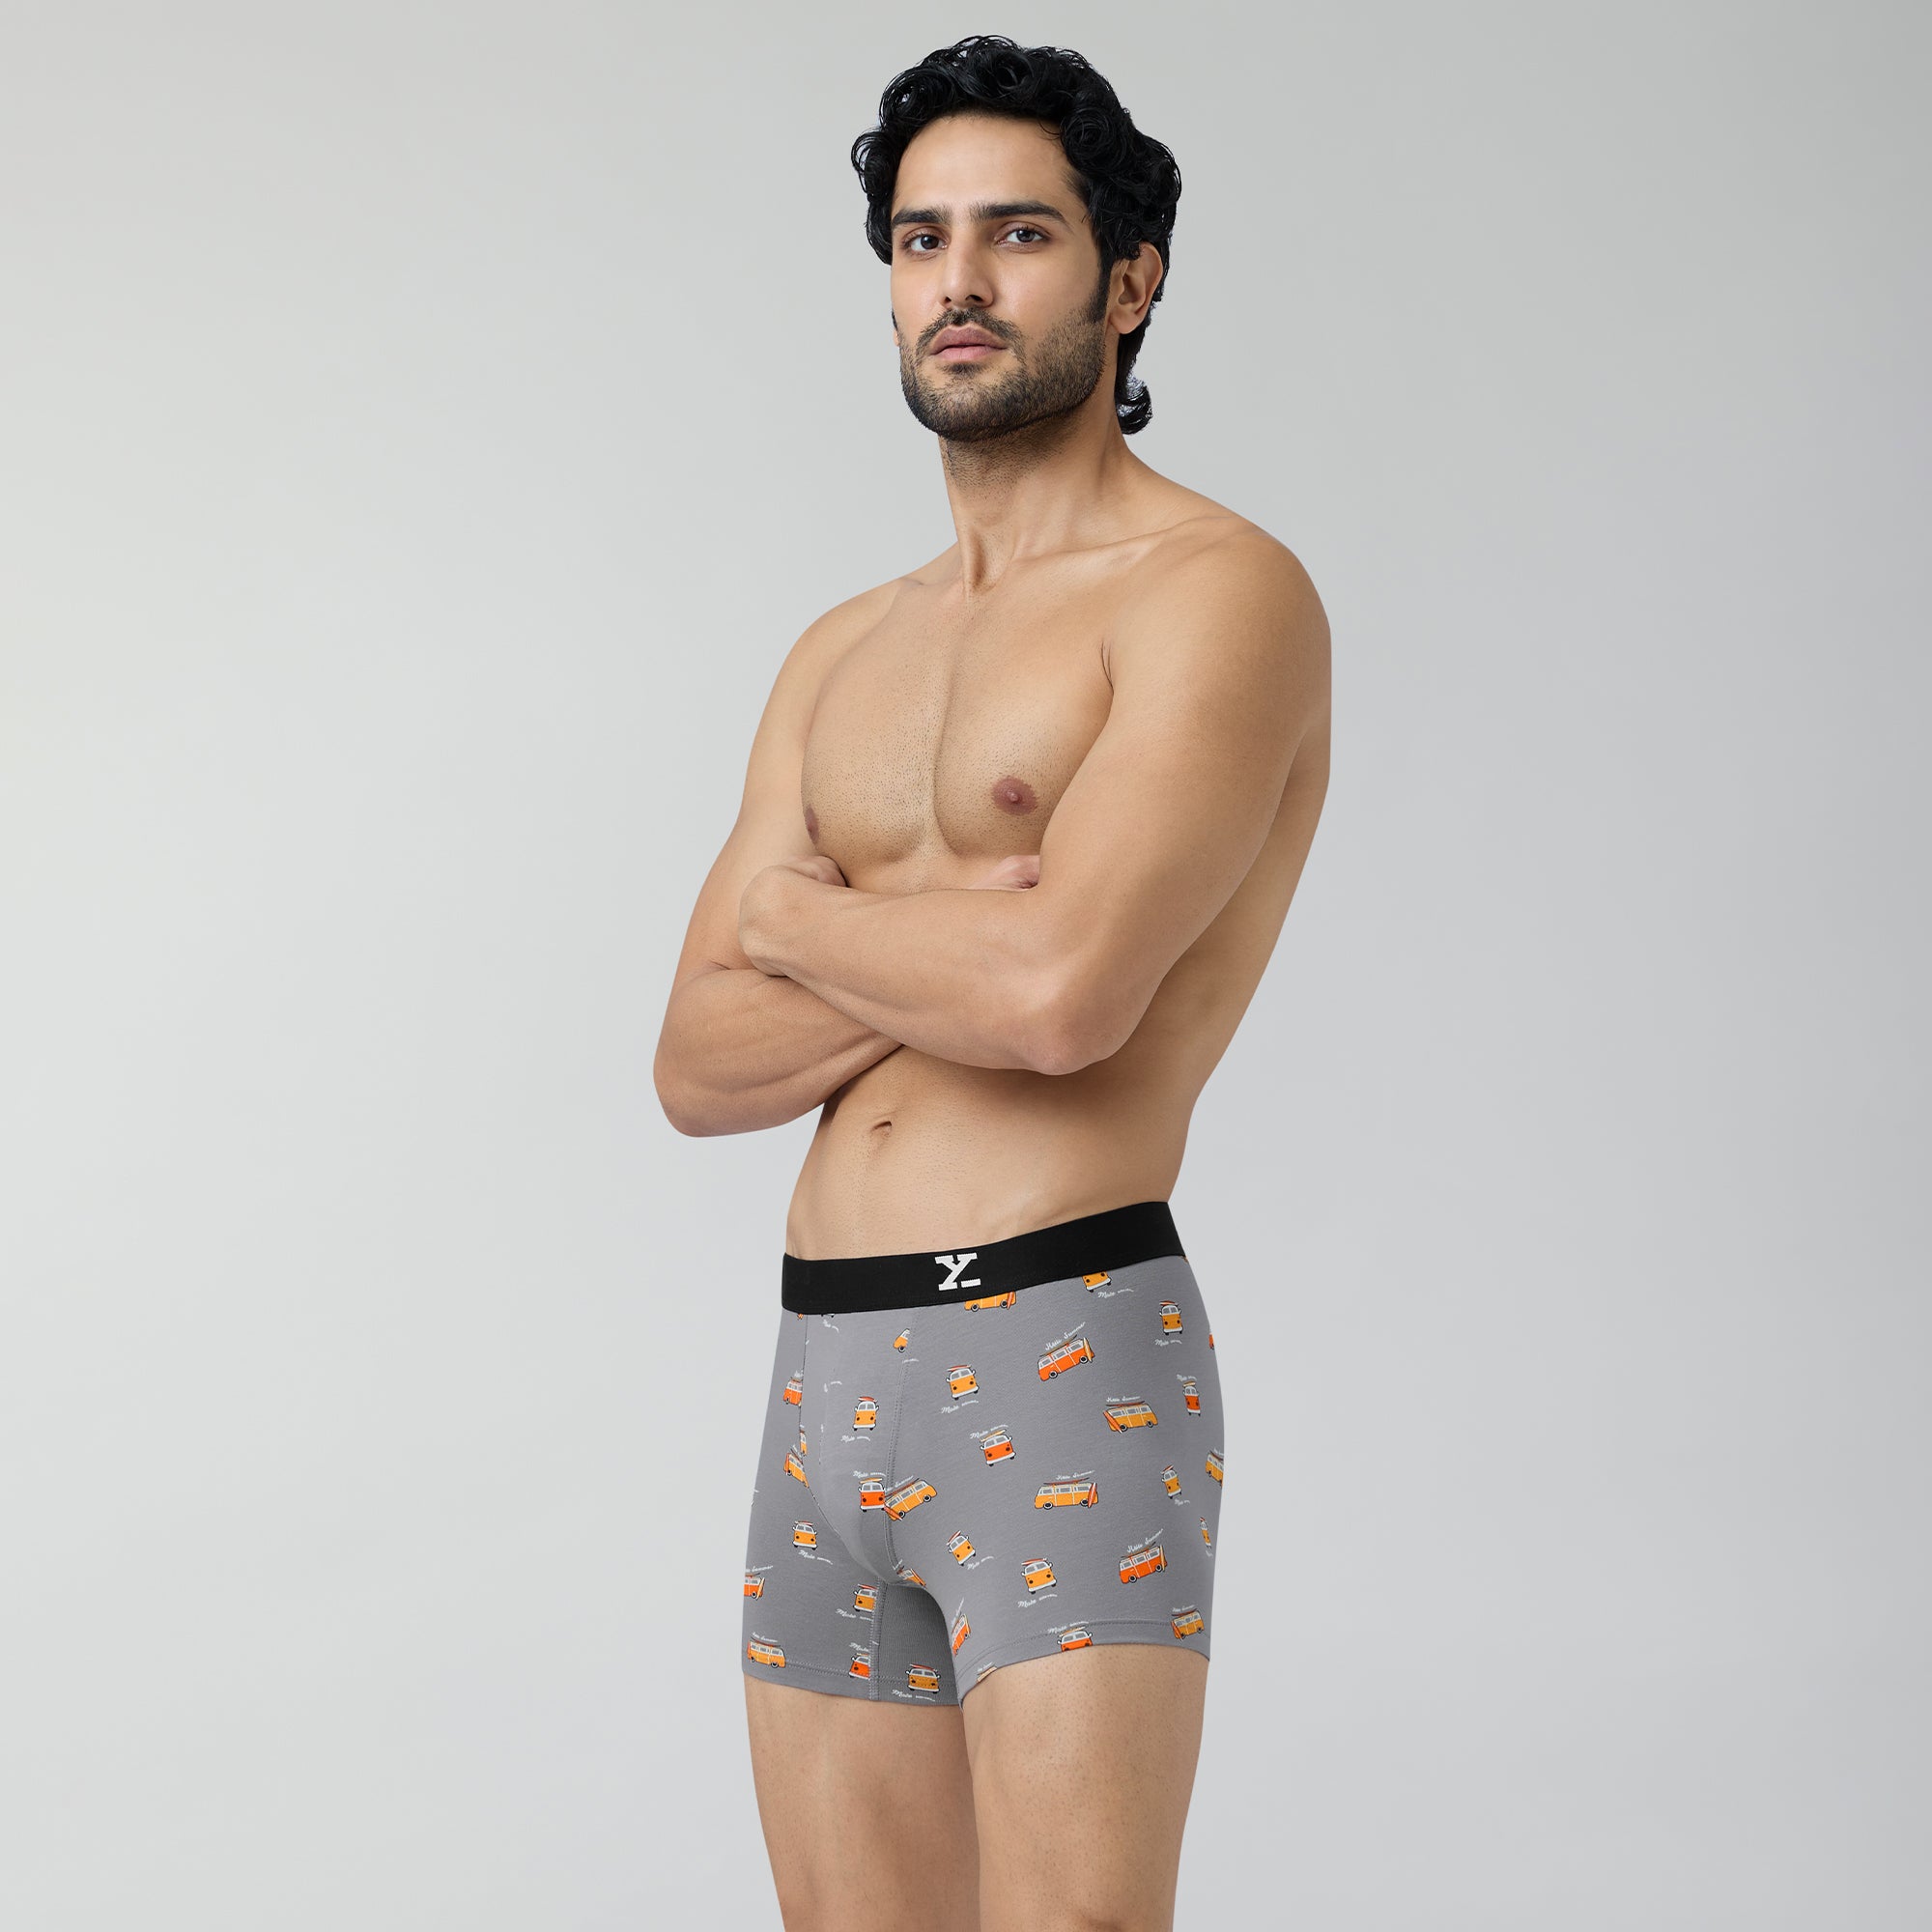 Plain XYXX Intellistretch Super Combed Cotton Aero Trunk Underwear for Men,  Length: Mid Way, Type: Trunks at Rs 315/pack in Surat